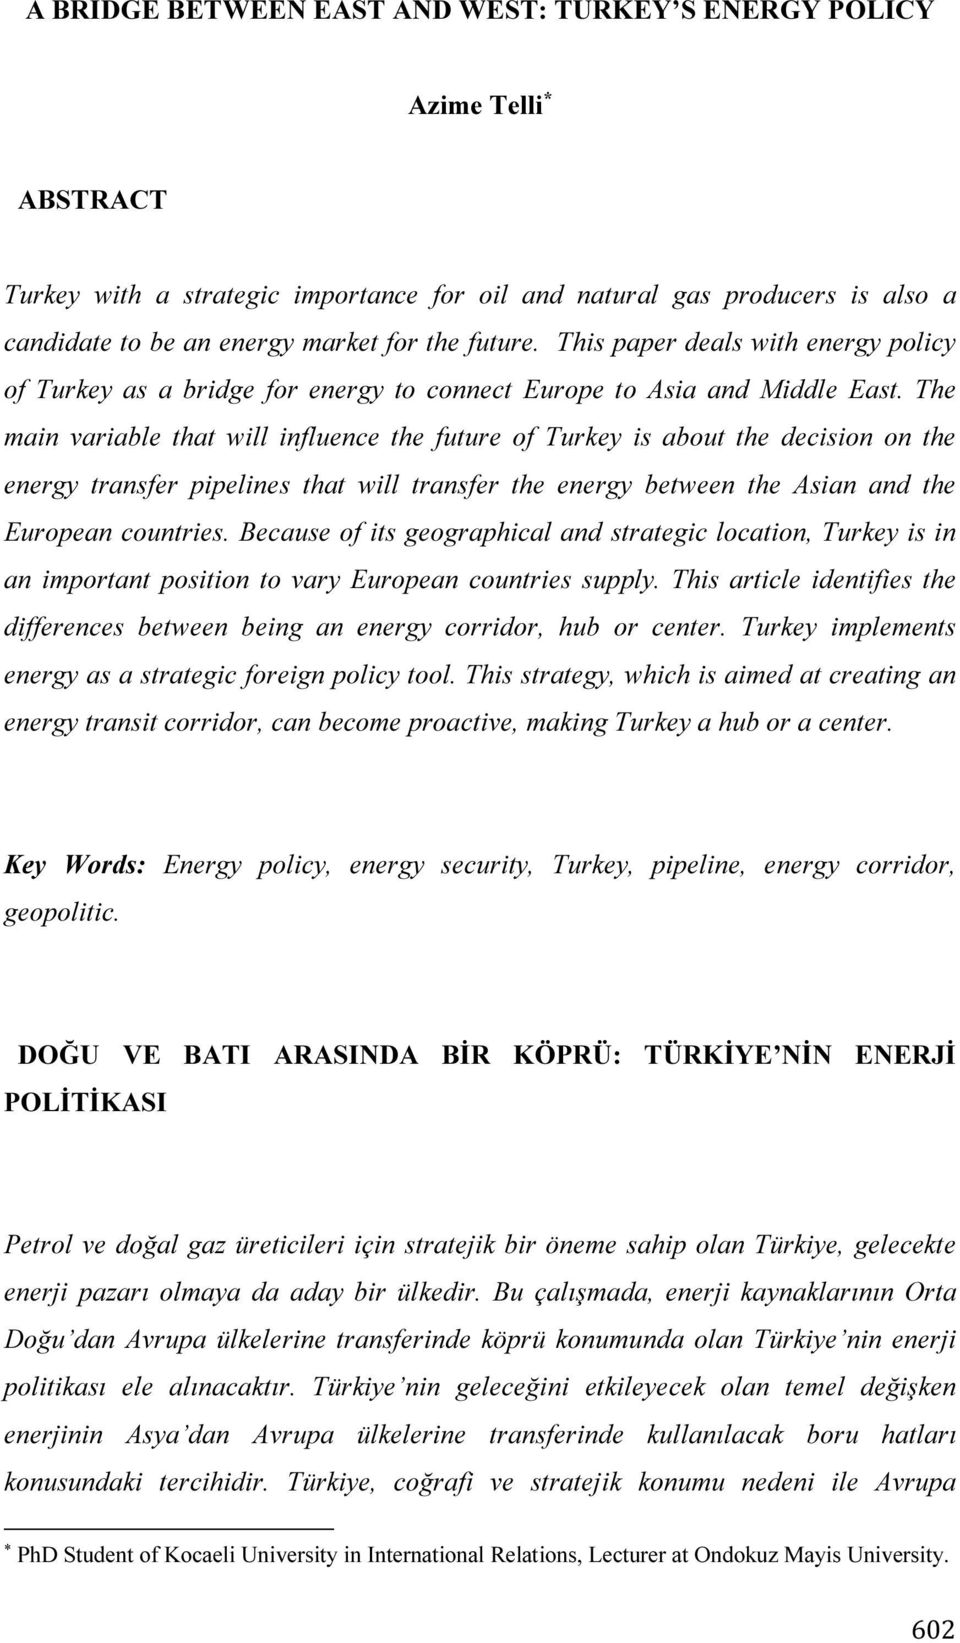 The main variable that will influence the future of Turkey is about the decision on the energy transfer pipelines that will transfer the energy between the Asian and the European countries.